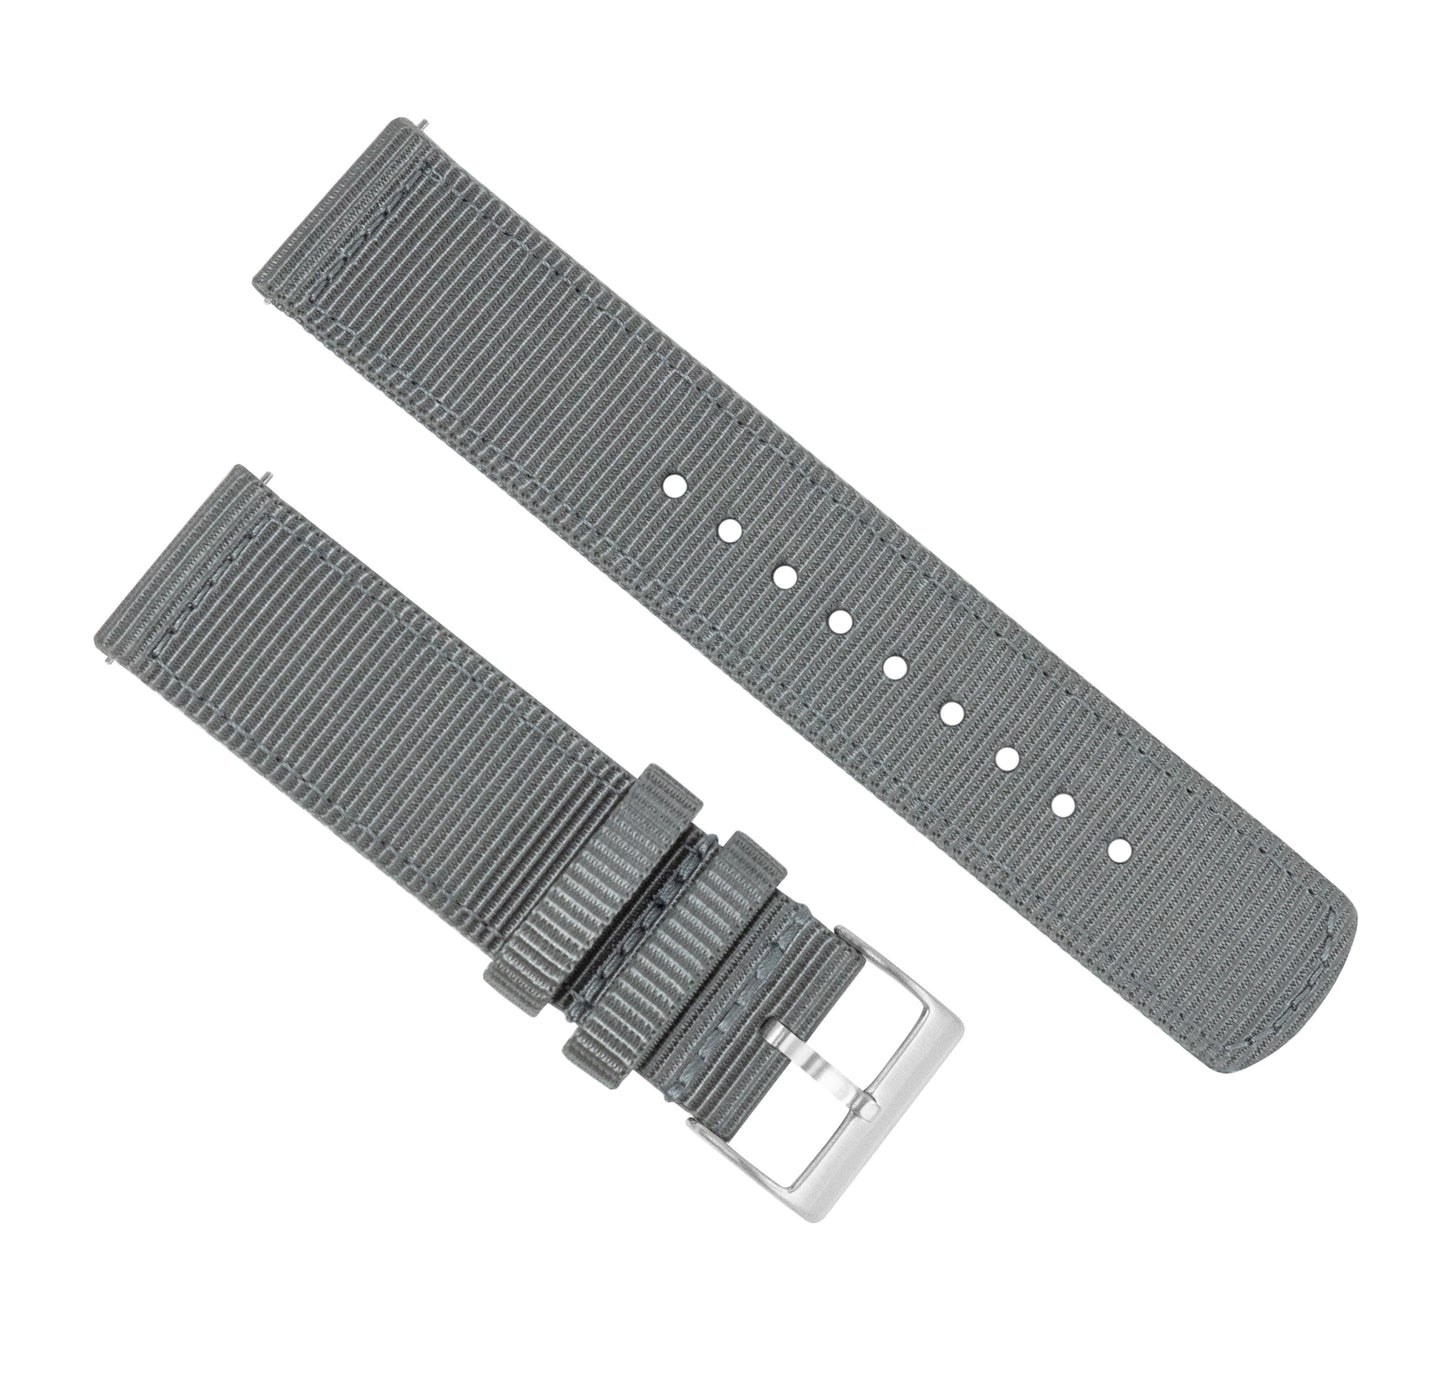 Fossil Q | Two-Piece NATO Style | Smoke Grey - Barton Watch Bands